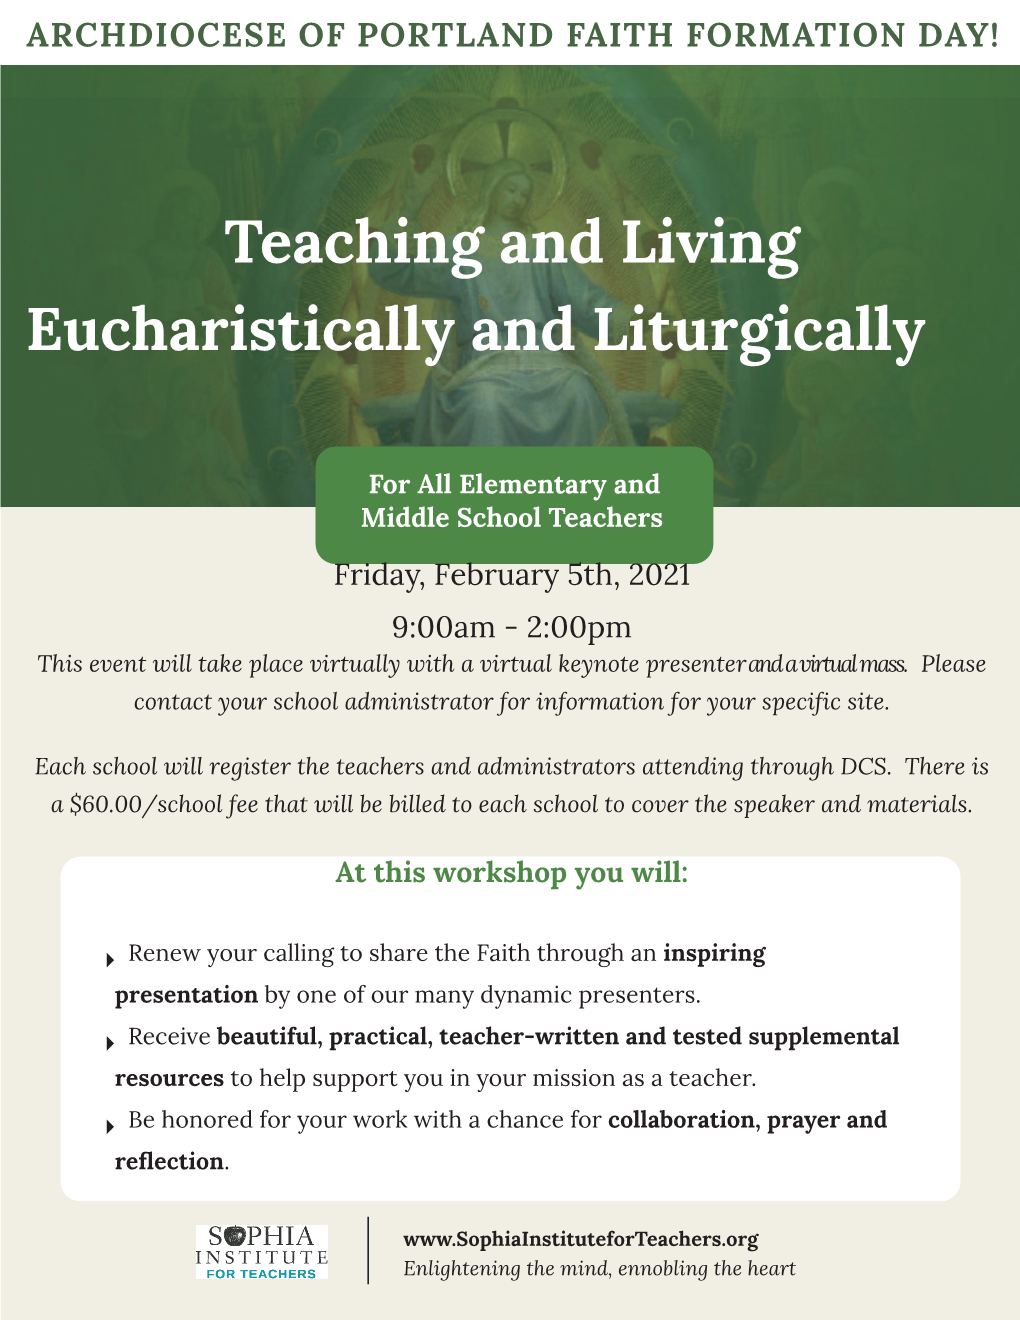 Teaching and Living Eucharistically and Liturgically